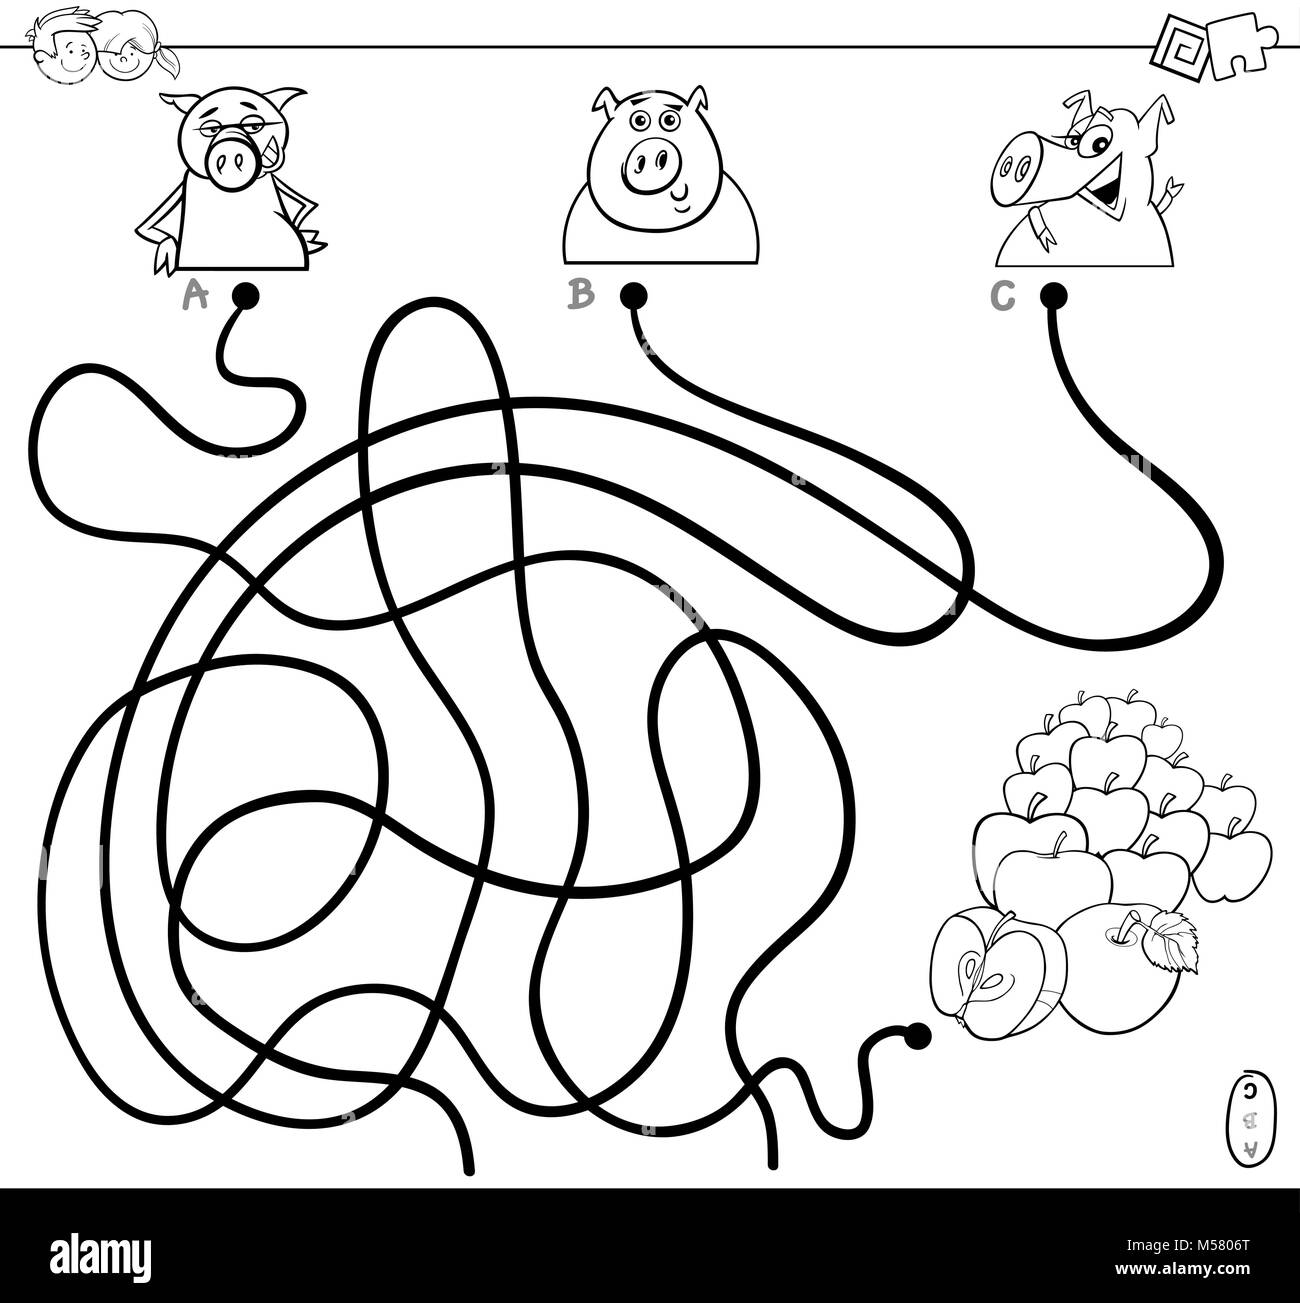 Black and White Cartoon Illustration of Paths or Maze Puzzle Activity Game with Funny Pigs Farm Animal Characters and Apples Coloring Book Stock Vector